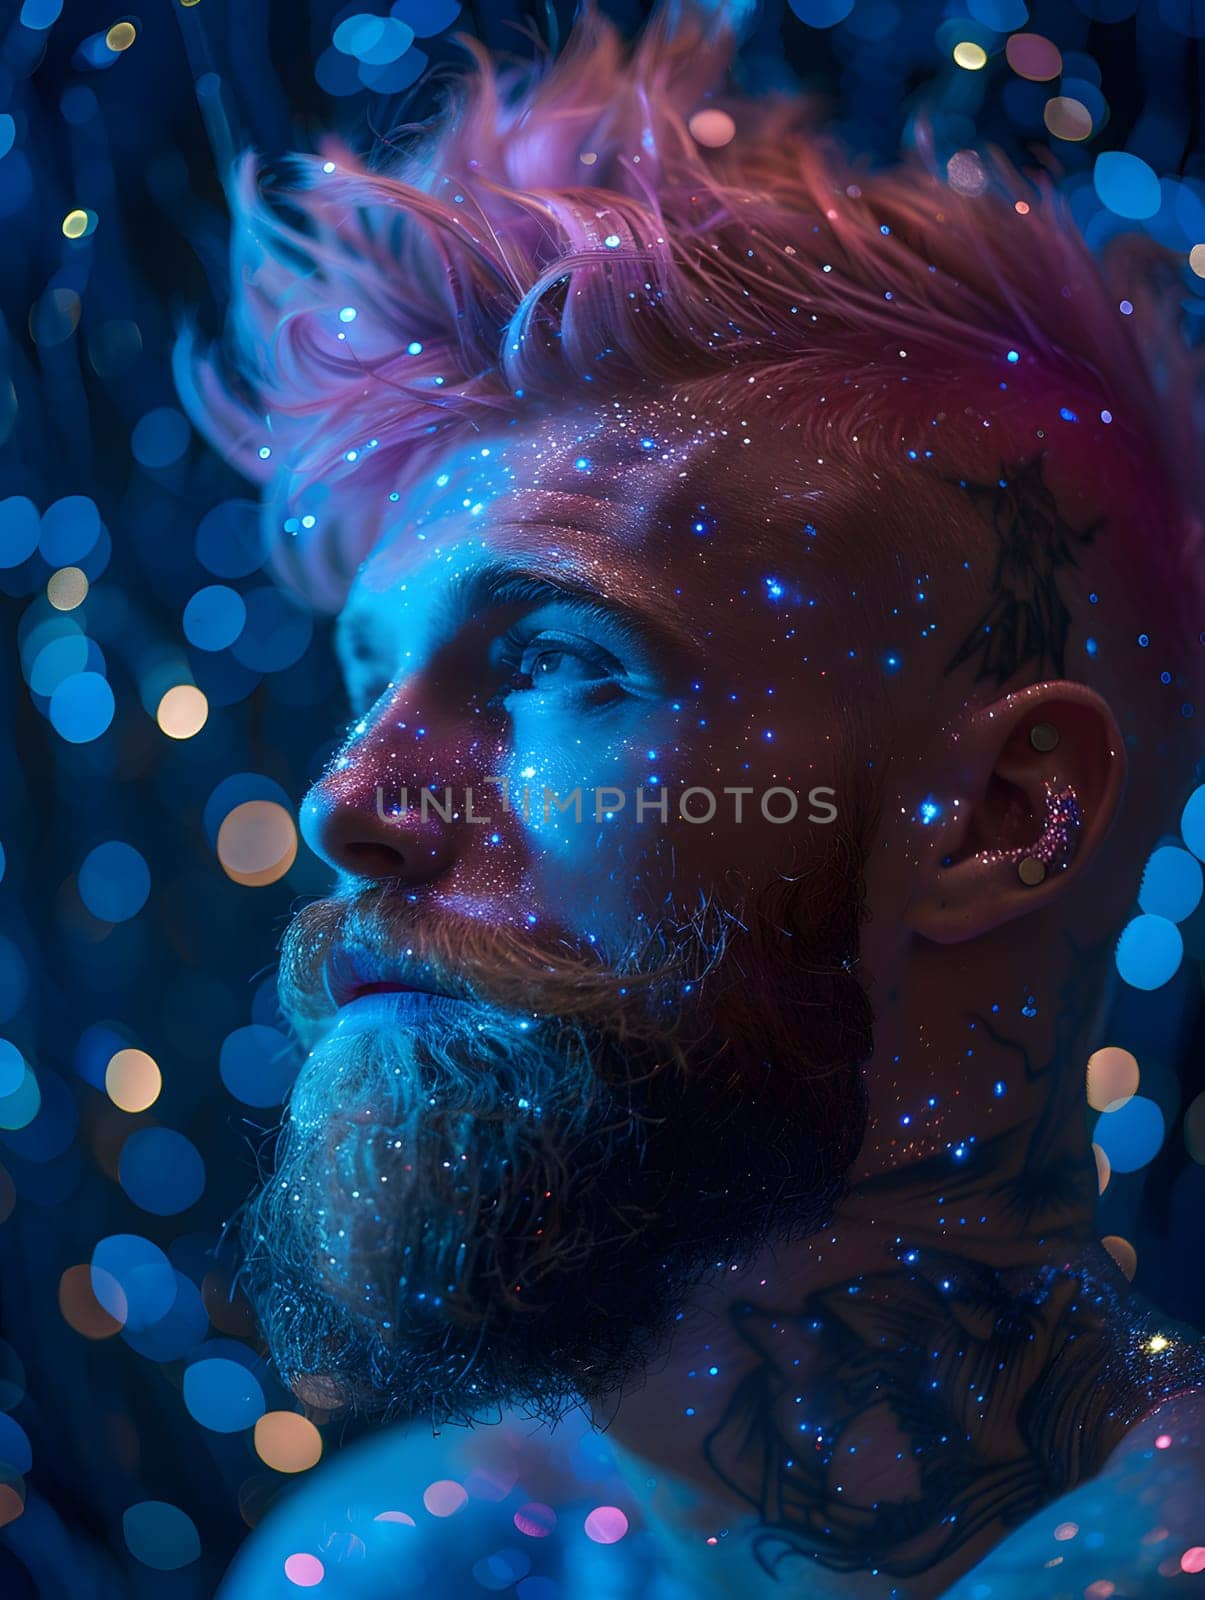 An organism with pink hair and a beard is illuminated by electric blue lights in an underwater event. The marine biologyinspired art piece contrasts with the deep blue surroundings